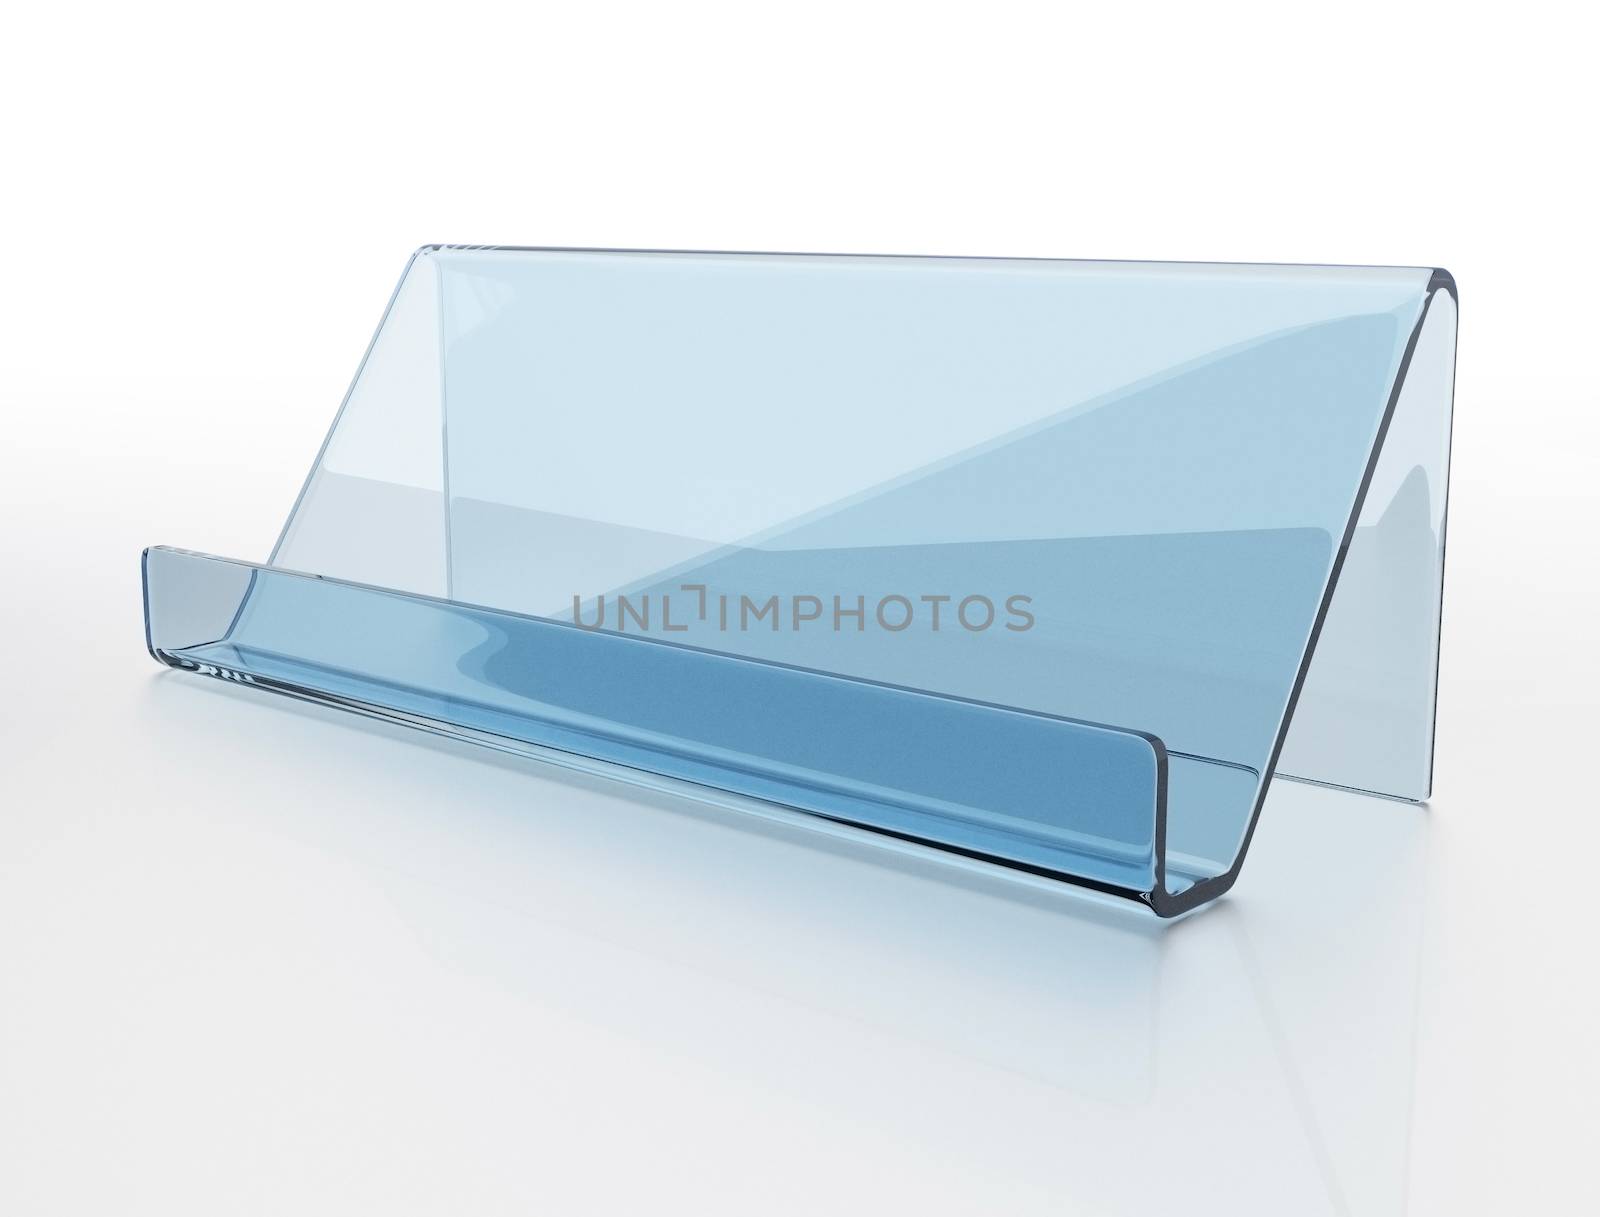 Render with transparent stand on a business card on a white background